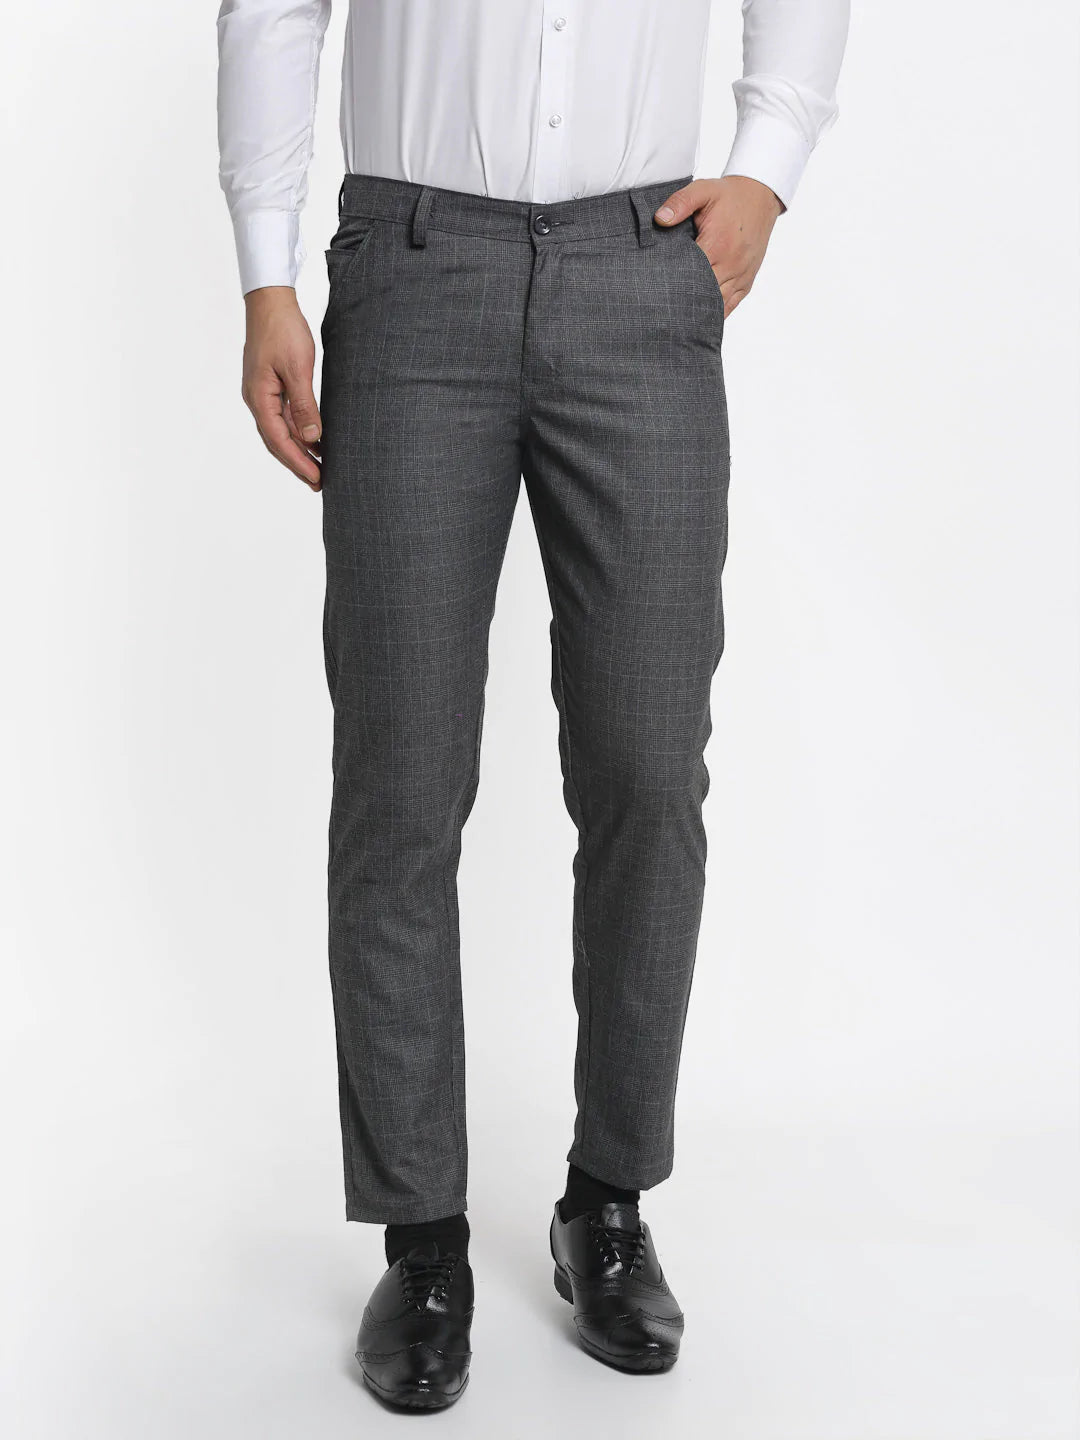 Jainish Men's Charcoal Checked Formal Trousers ( FGP 266Charcoal )